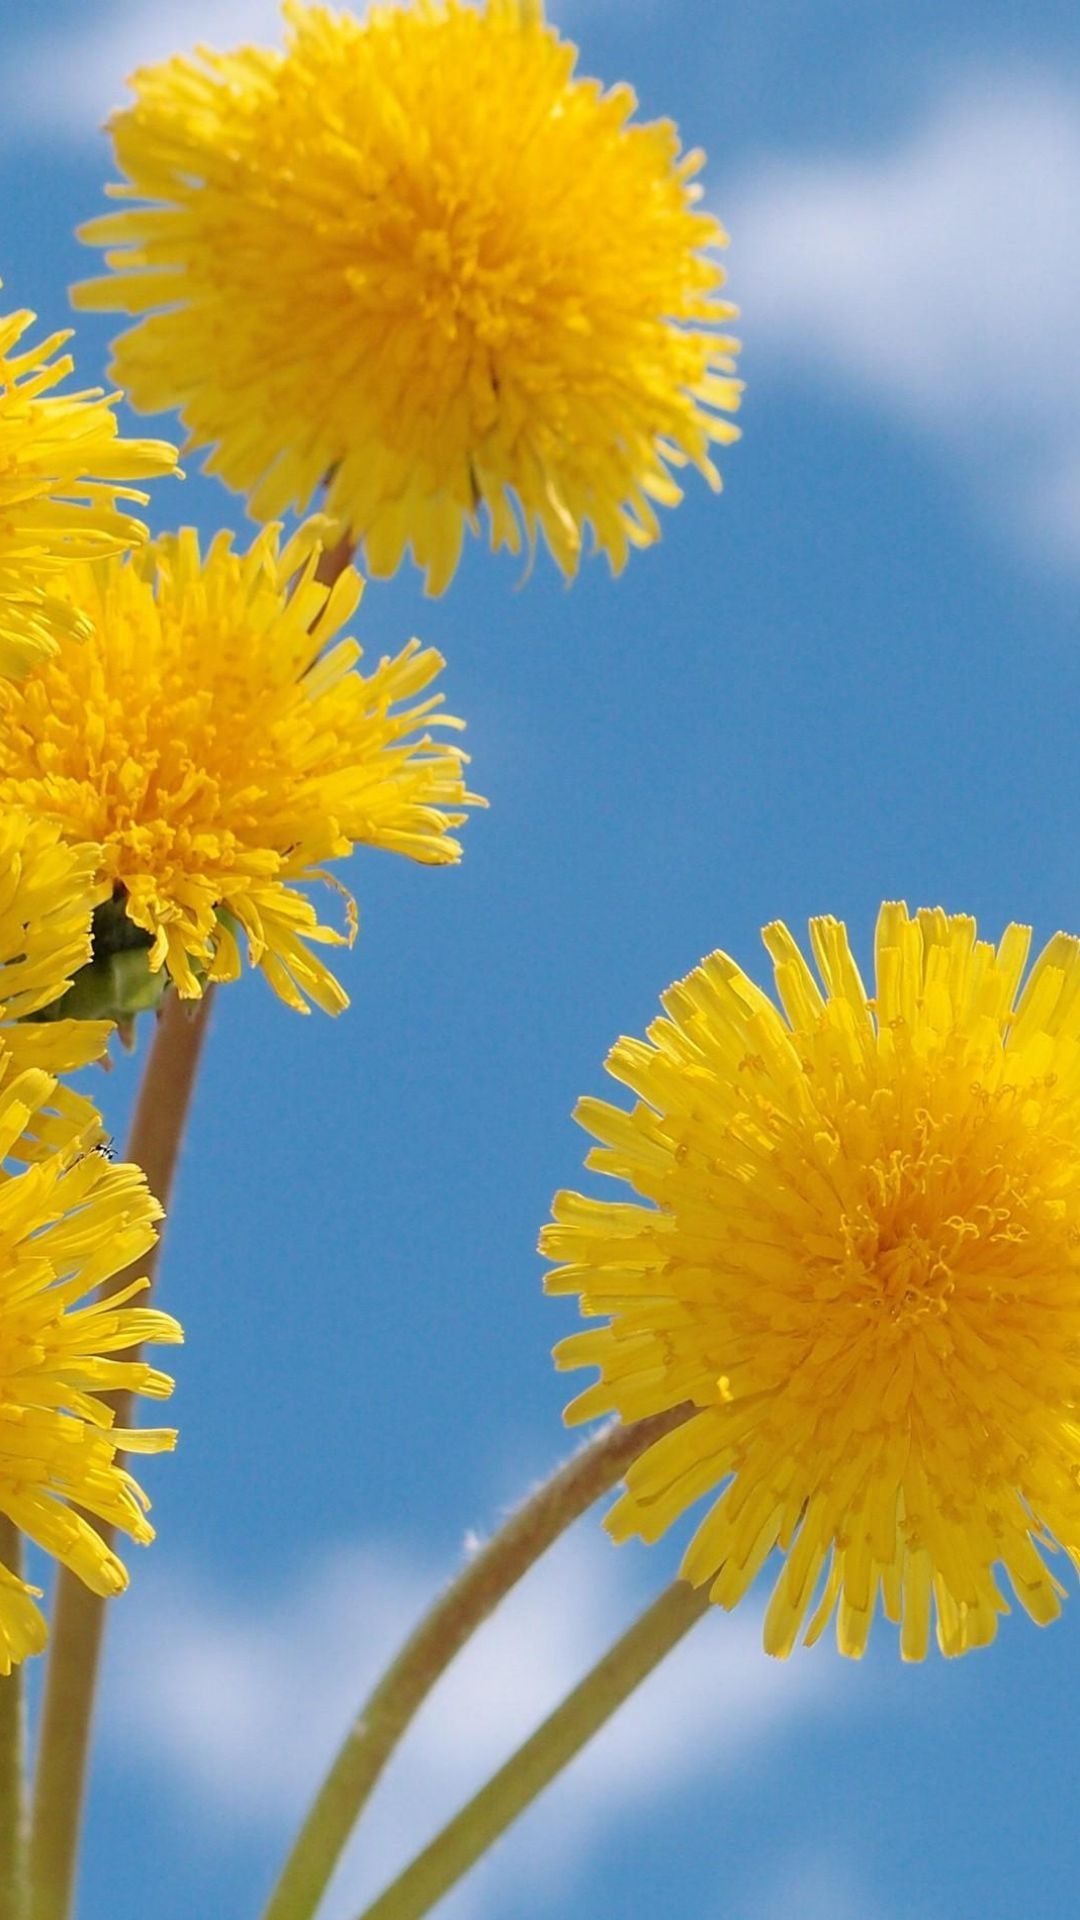 Yellow flowers on a blue sky background - Dandelions